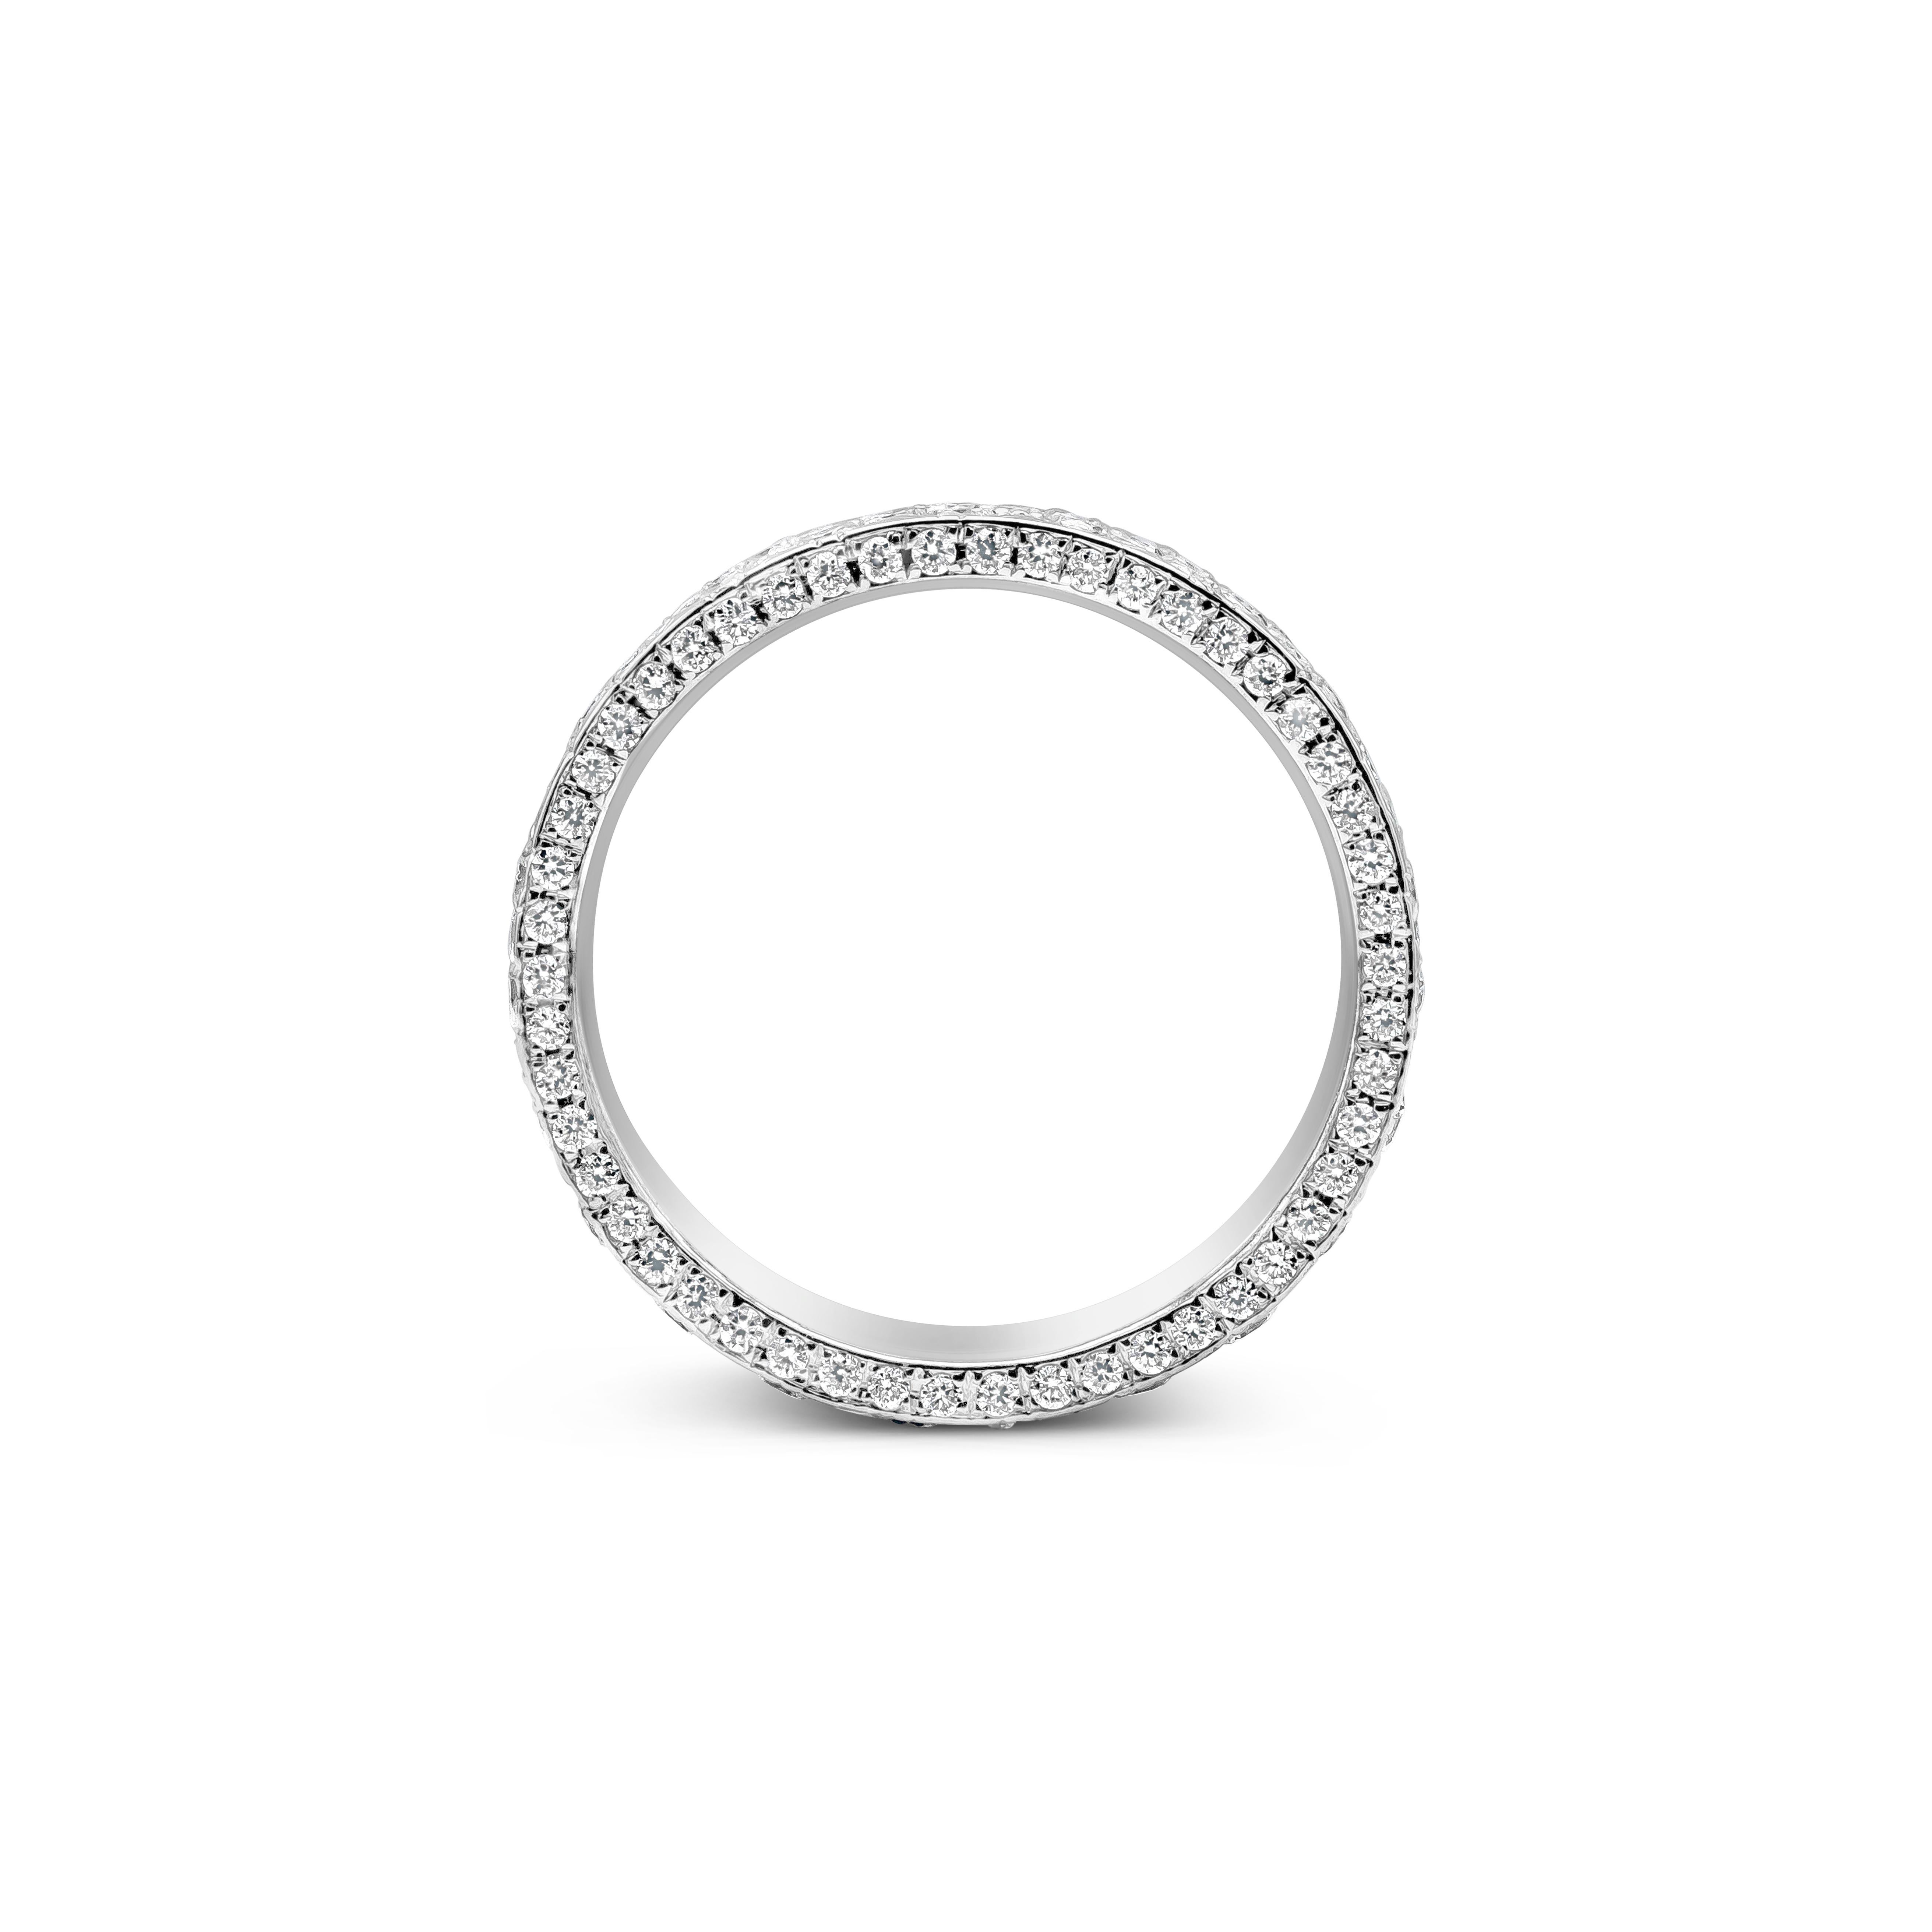 A unique and intricately-designed fashion ring showcasing a micro-pave of round brilliant diamonds weighing 3.12 carats total. Diamonds are 165 pieces in total, F color and VS in clarity. One side of the ring is accented with smaller round brilliant